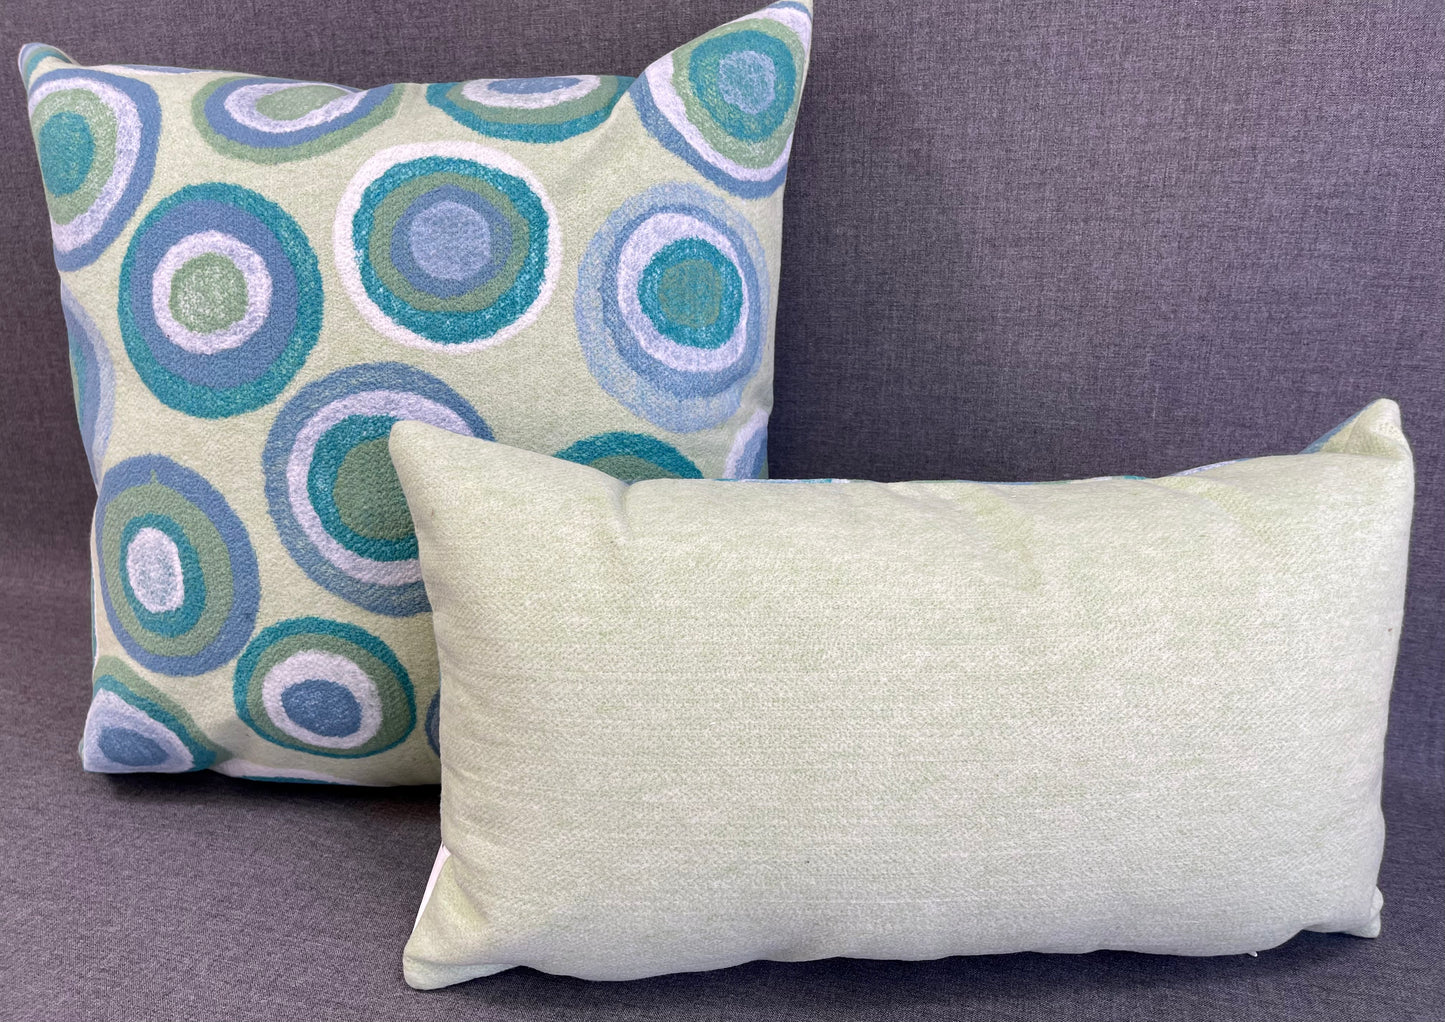 Outdoor Pillow - 18" x 18" - Lillypad; Circles of Green, White and Turquoise on a yellow/green background